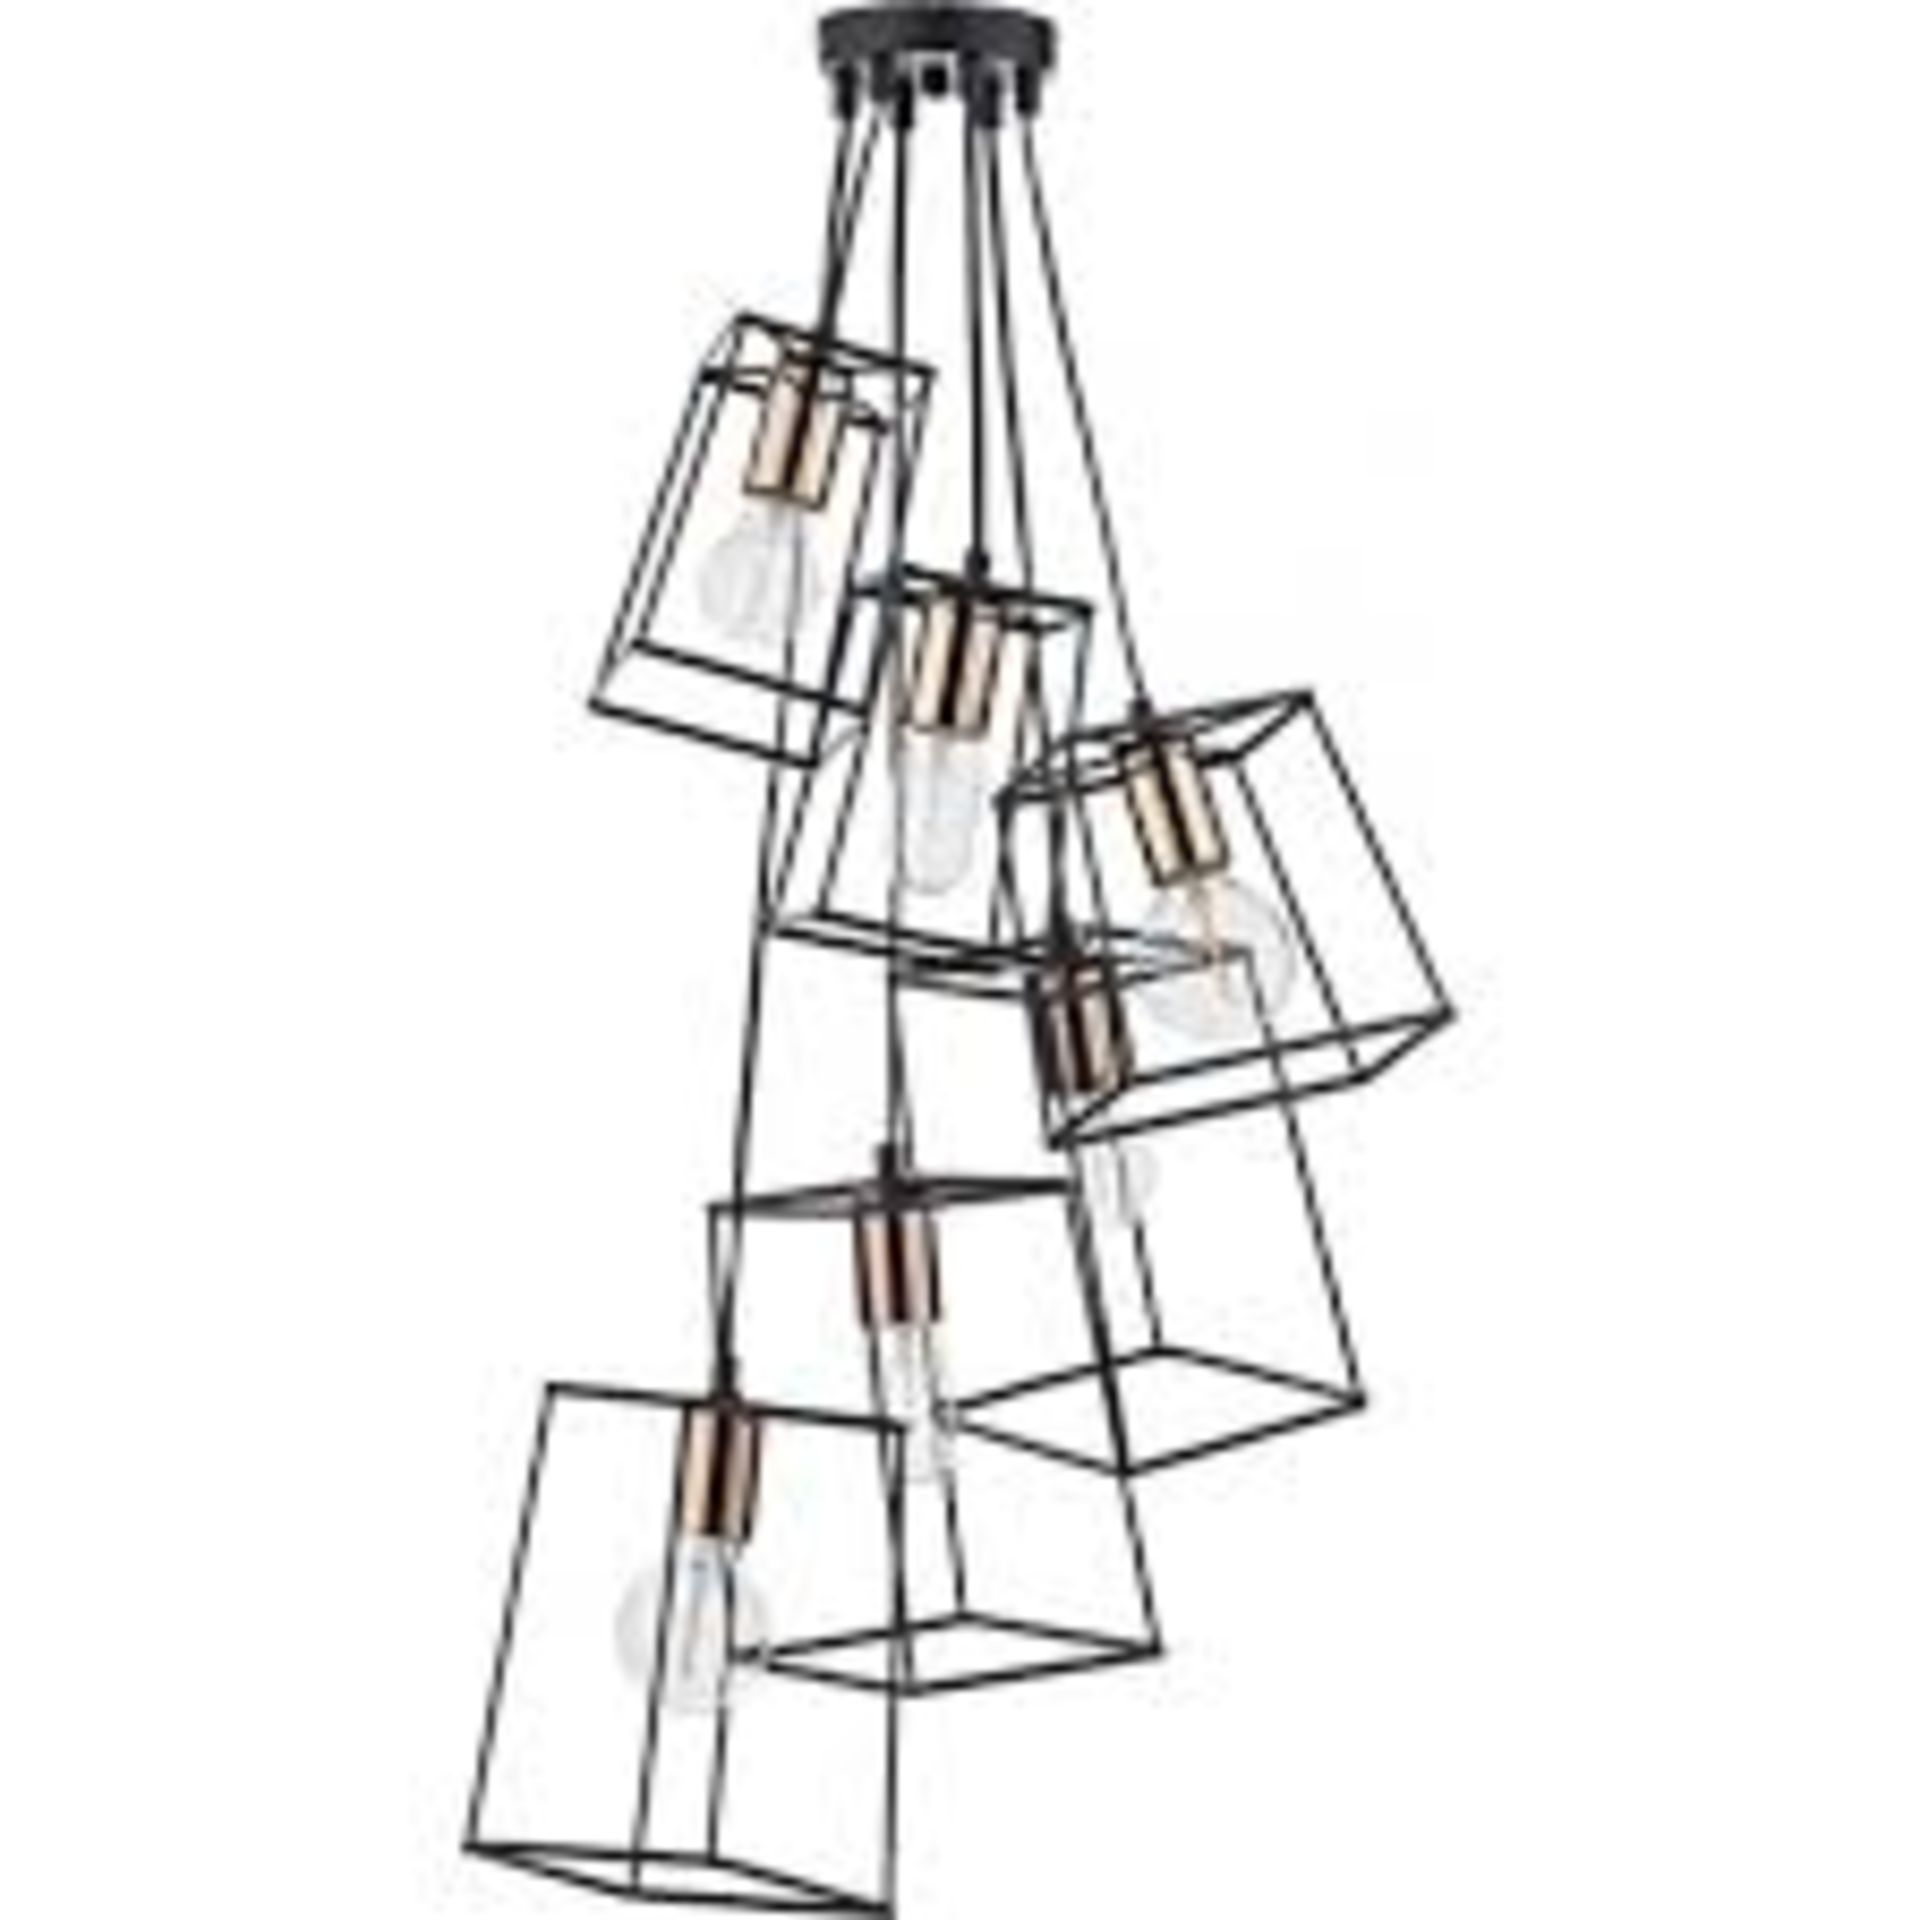 Boxed Tower 6 Light Black Finish Cluster Light RRP £120 (15250) (Public Viewing and Appraisals